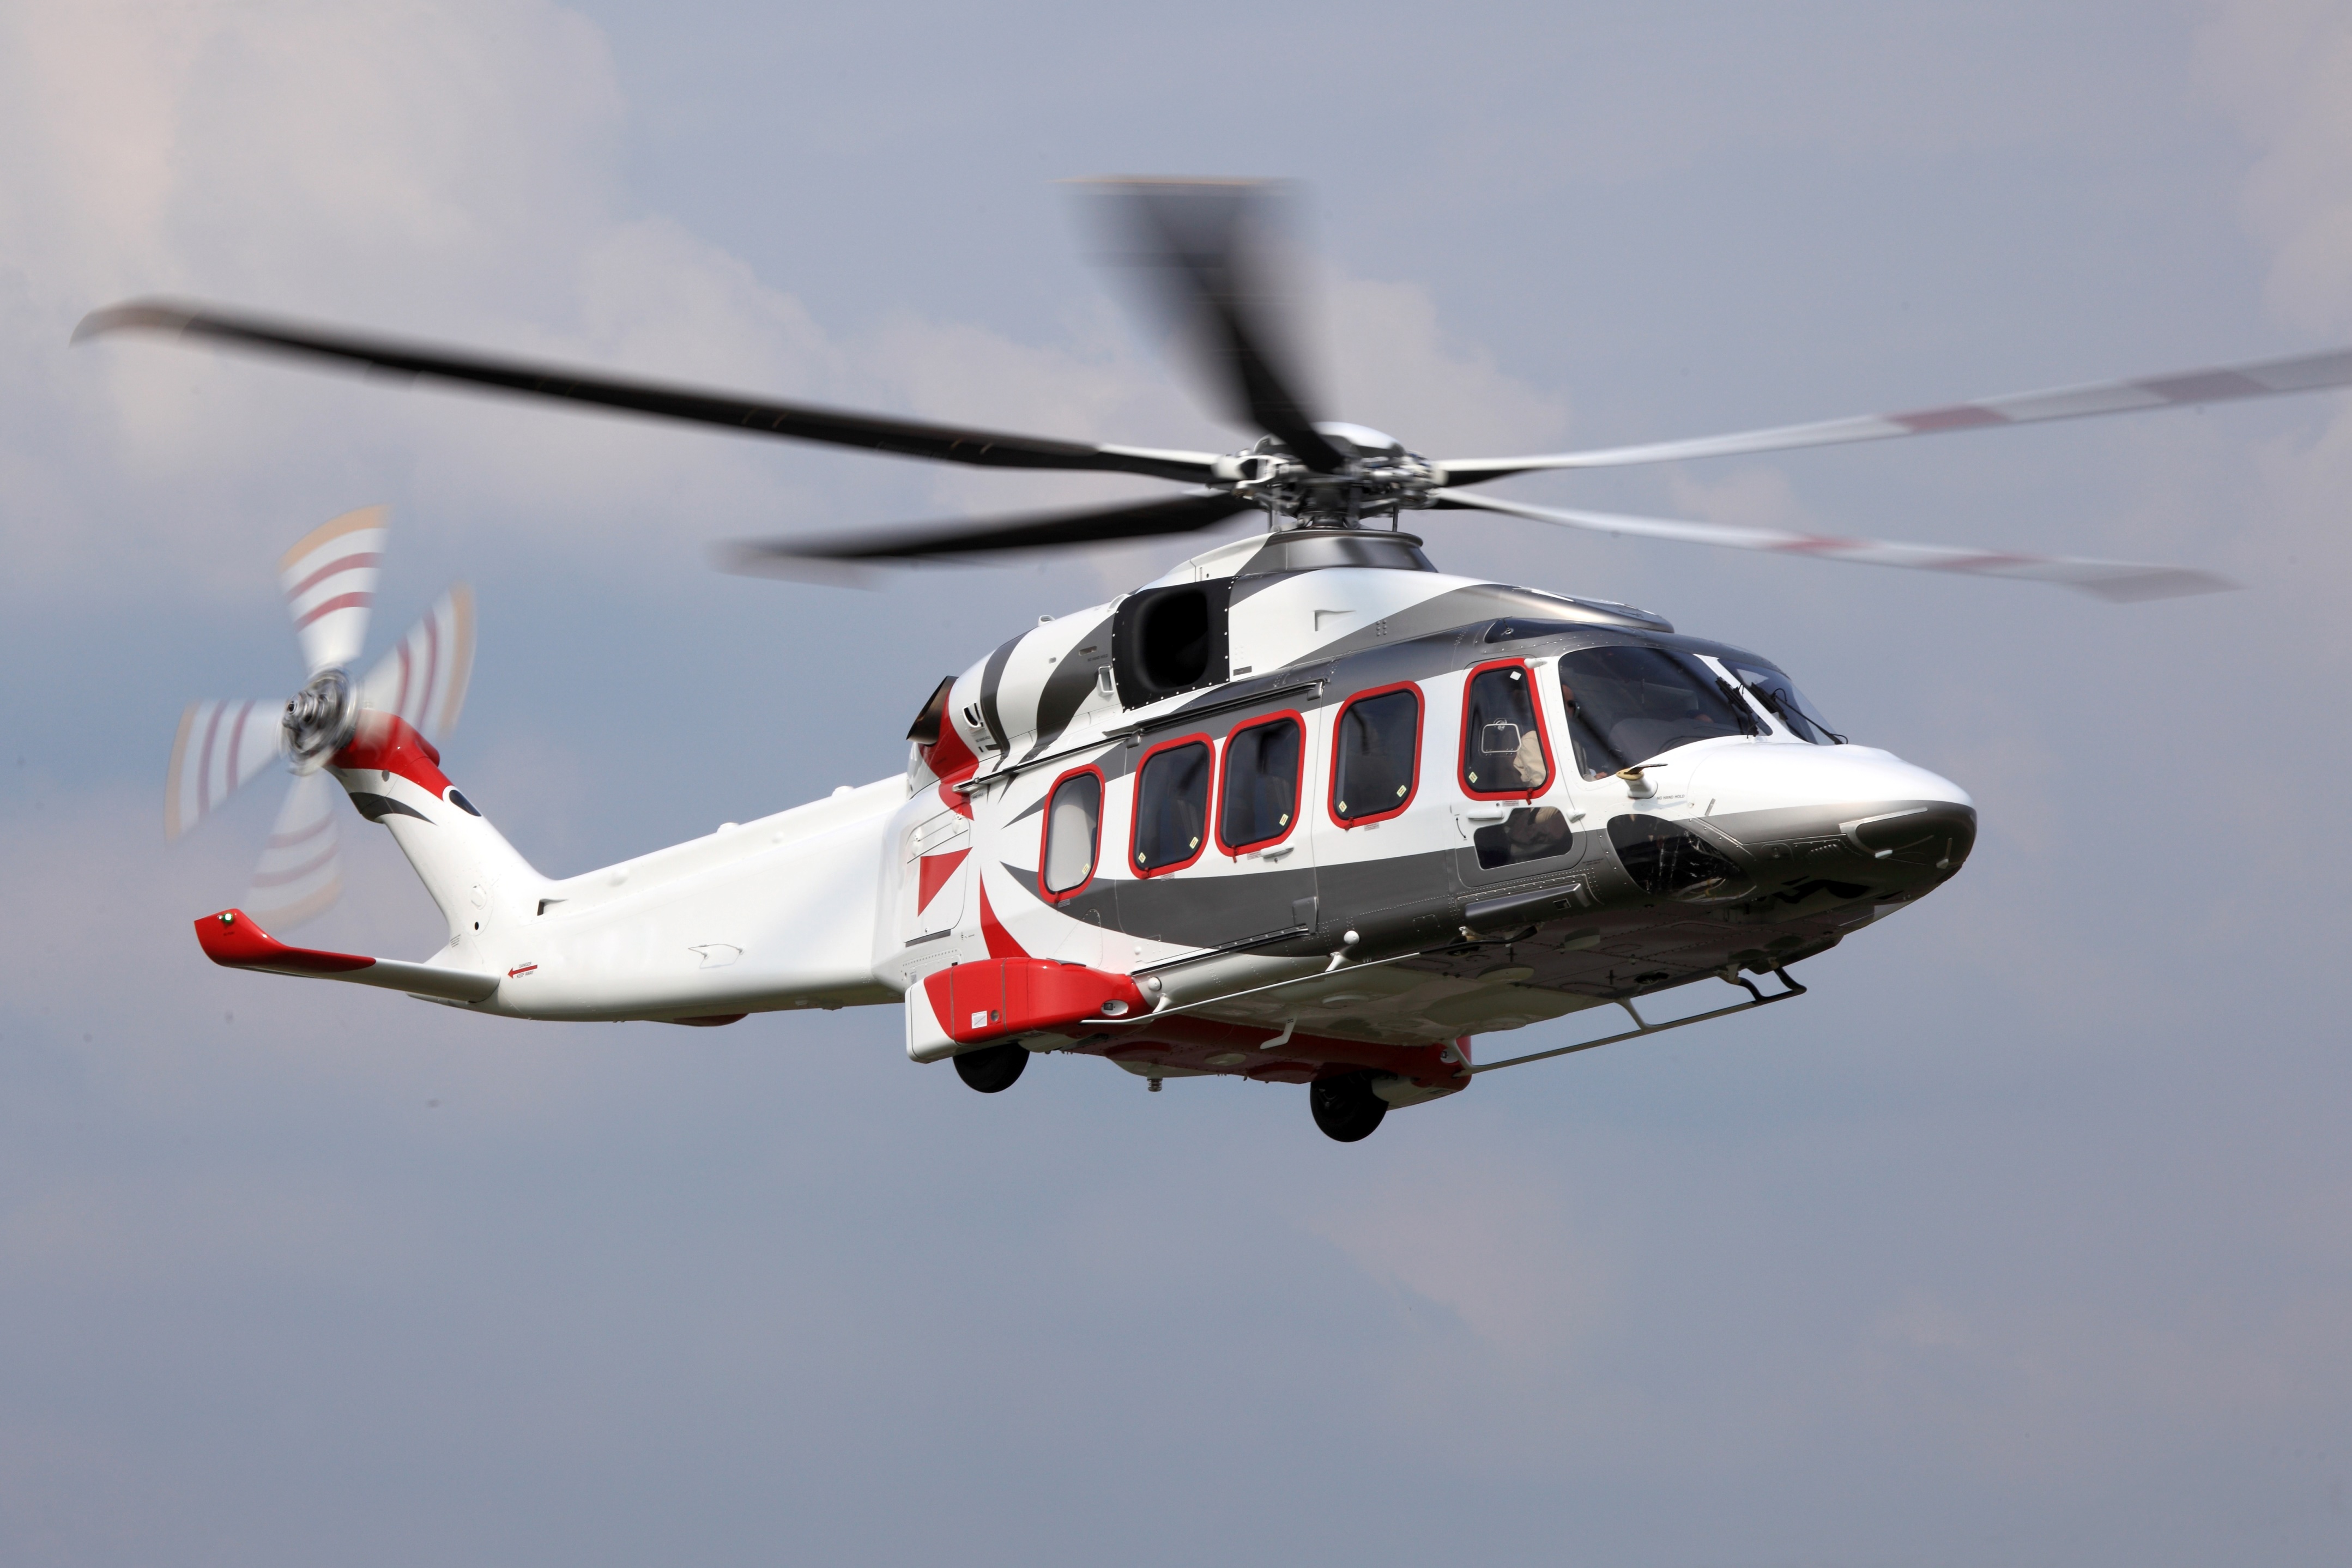 Many of the AW189’s customers are in the offshore oil-and-gas market, where high-altitude performance is not a priority. The aircraft is currently certified to a ceiling of only 10,000 feet, although it is capable of flying higher. Leonardo Photo